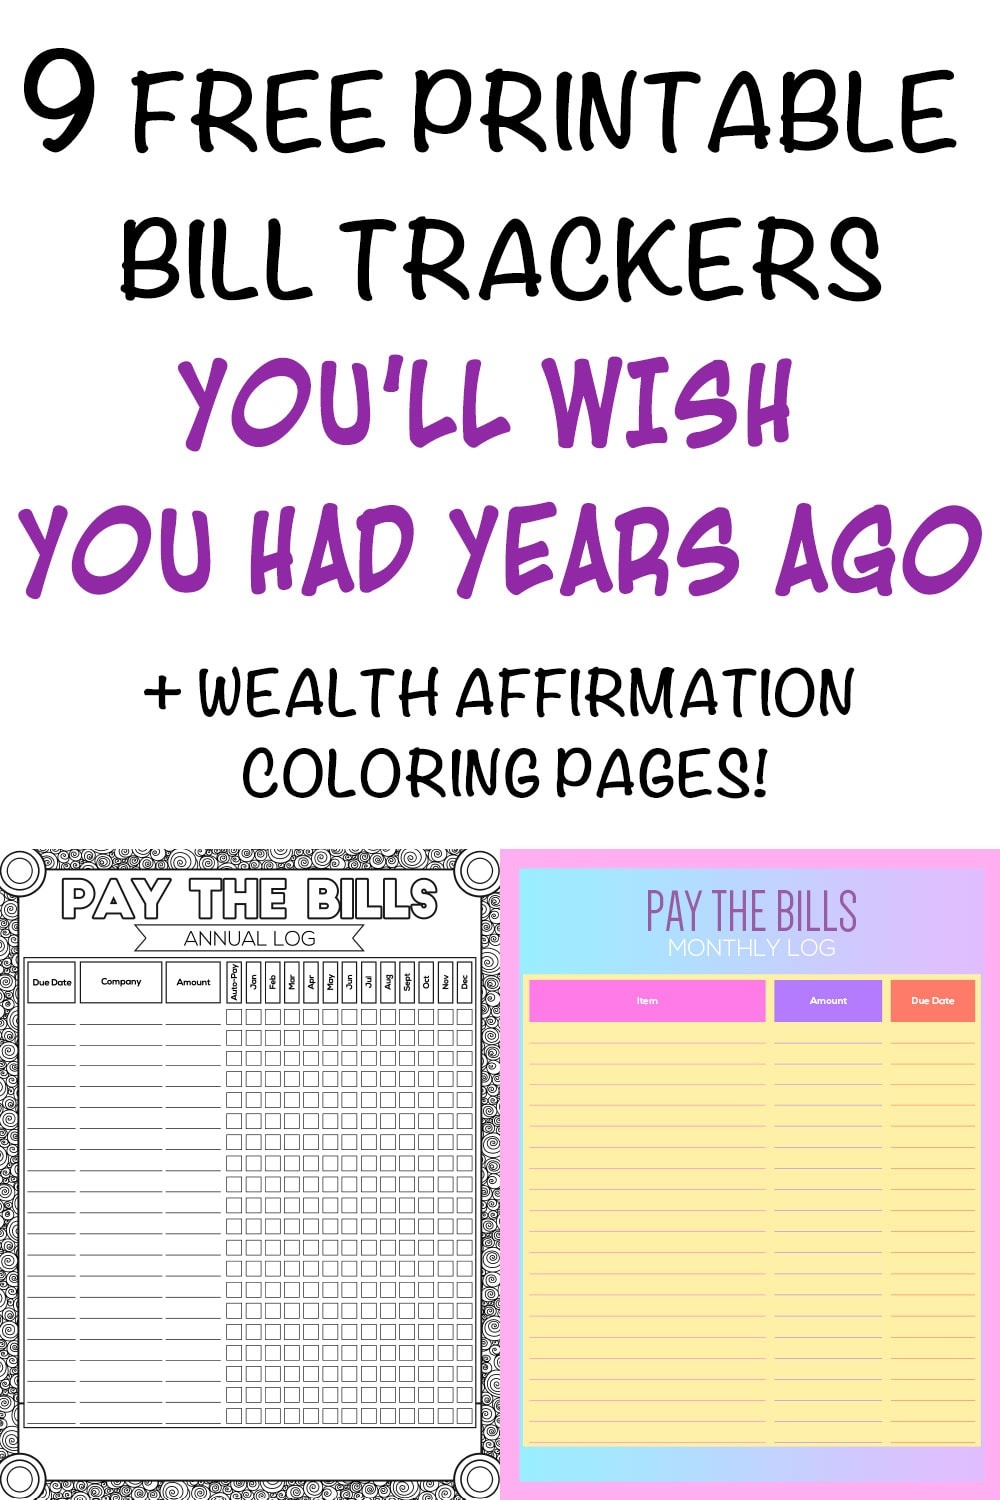 9 Printable Bill Payment Checklists And Bill Trackers - The Artisan Life - Free Printable Bill Tracker